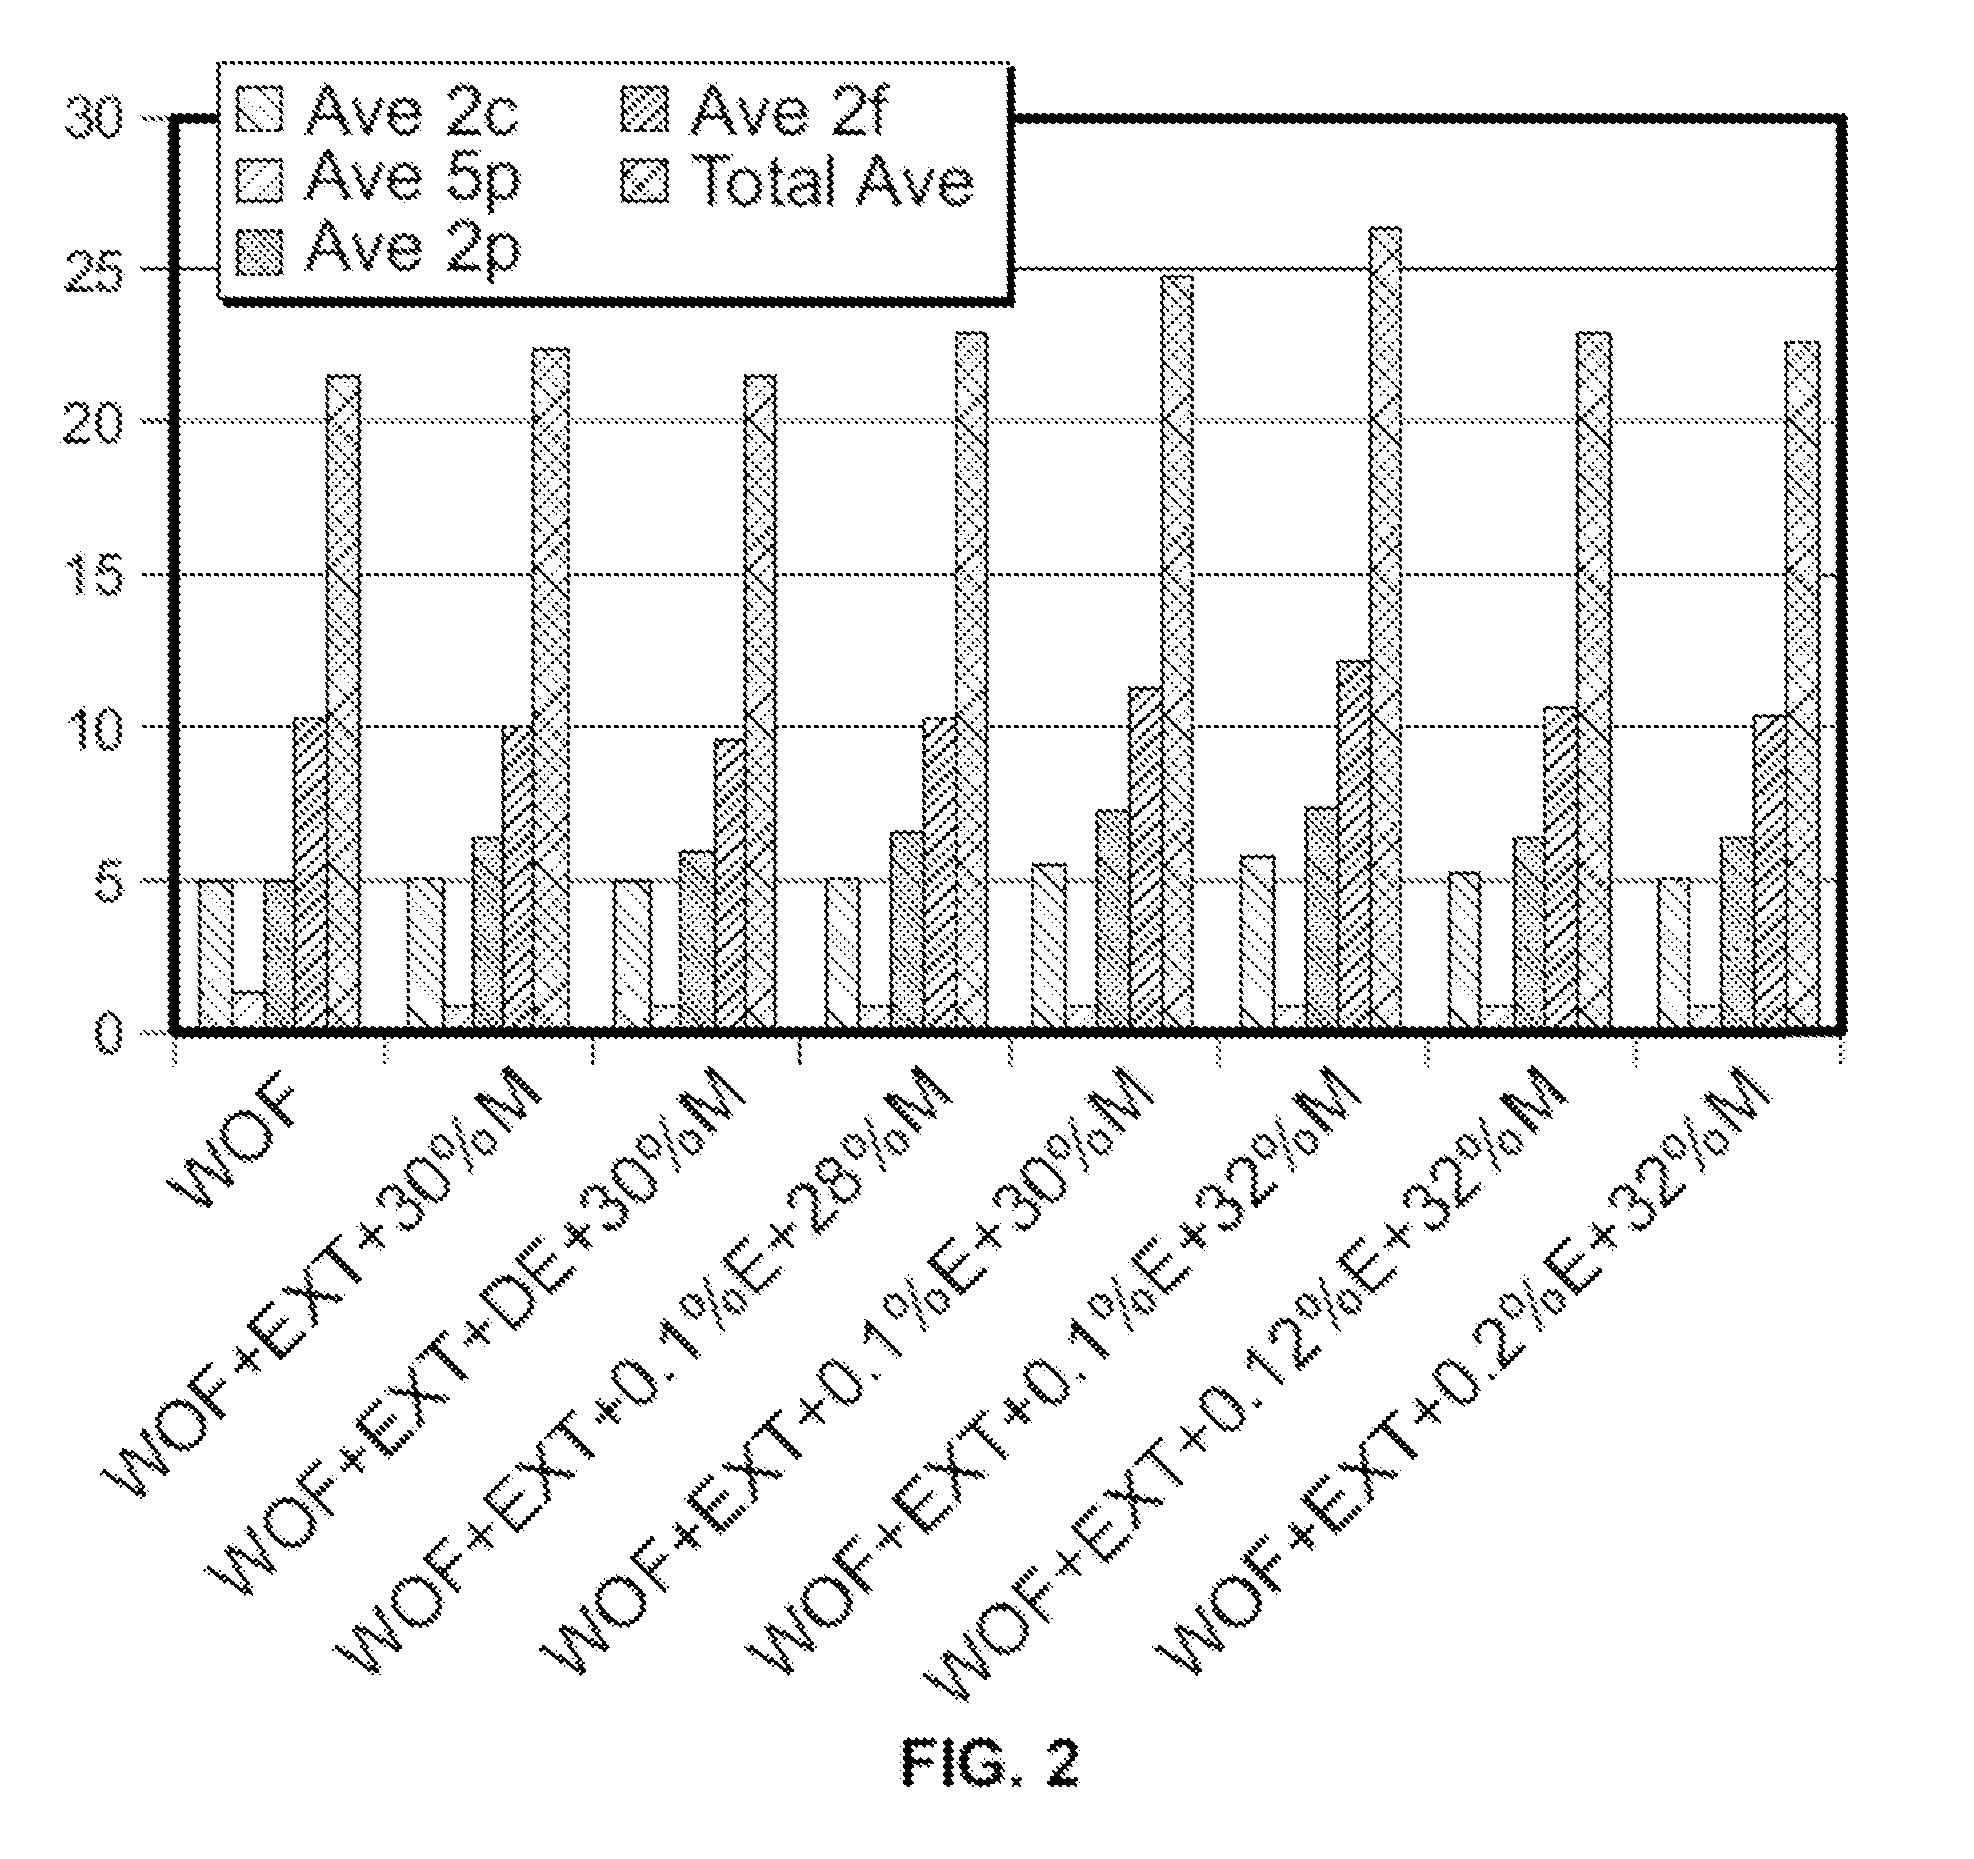 Method of processing oats to achieve oats with an increased avenanthramide content